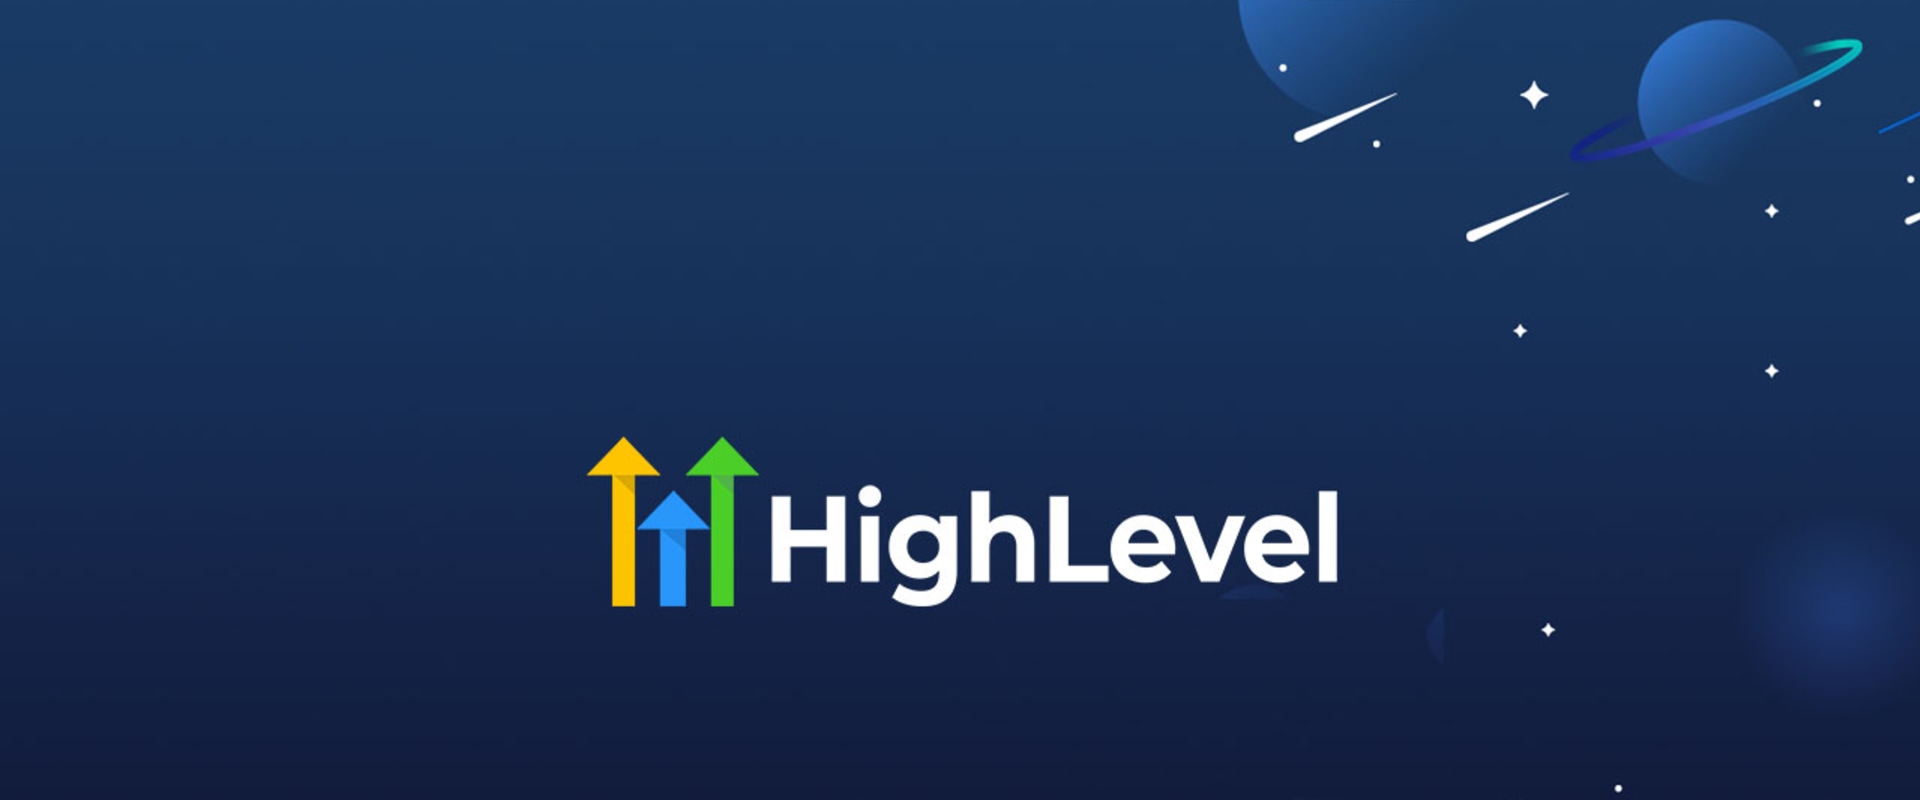 Gaining Inspiration and New Ideas for Using gohighlevel in Your Business